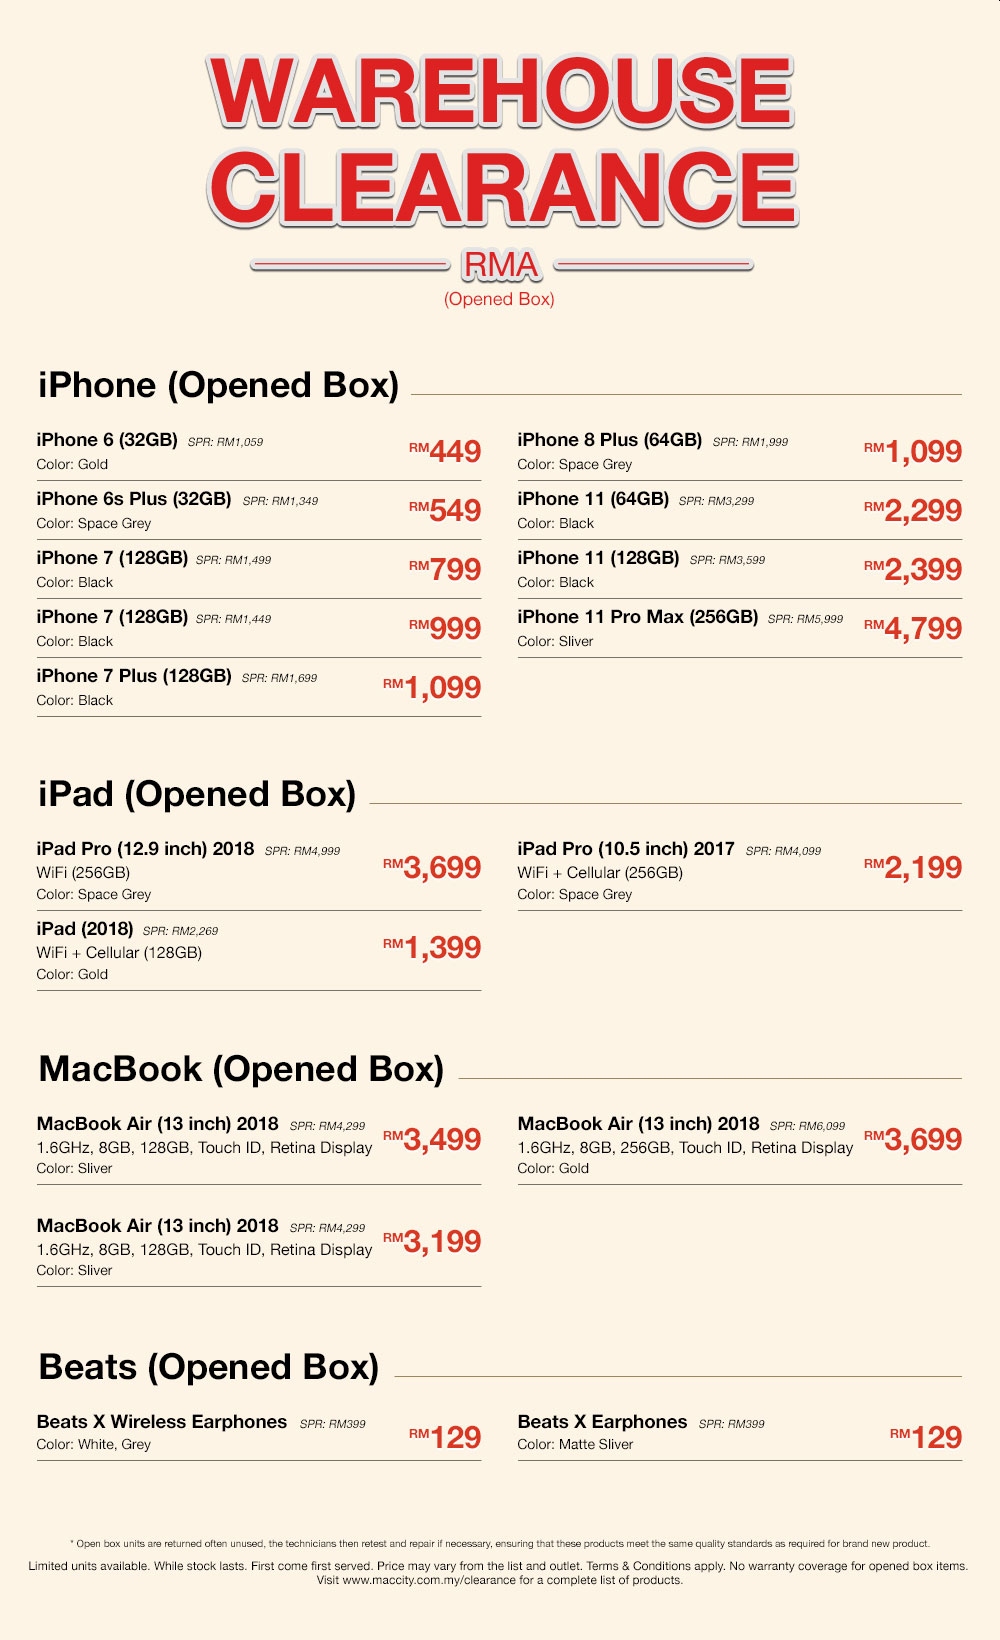 UPDATE] Mac City Warehouse Clearance: Ex-Demo MacBook Air and Pro going for  as low as RM999 - SoyaCincau